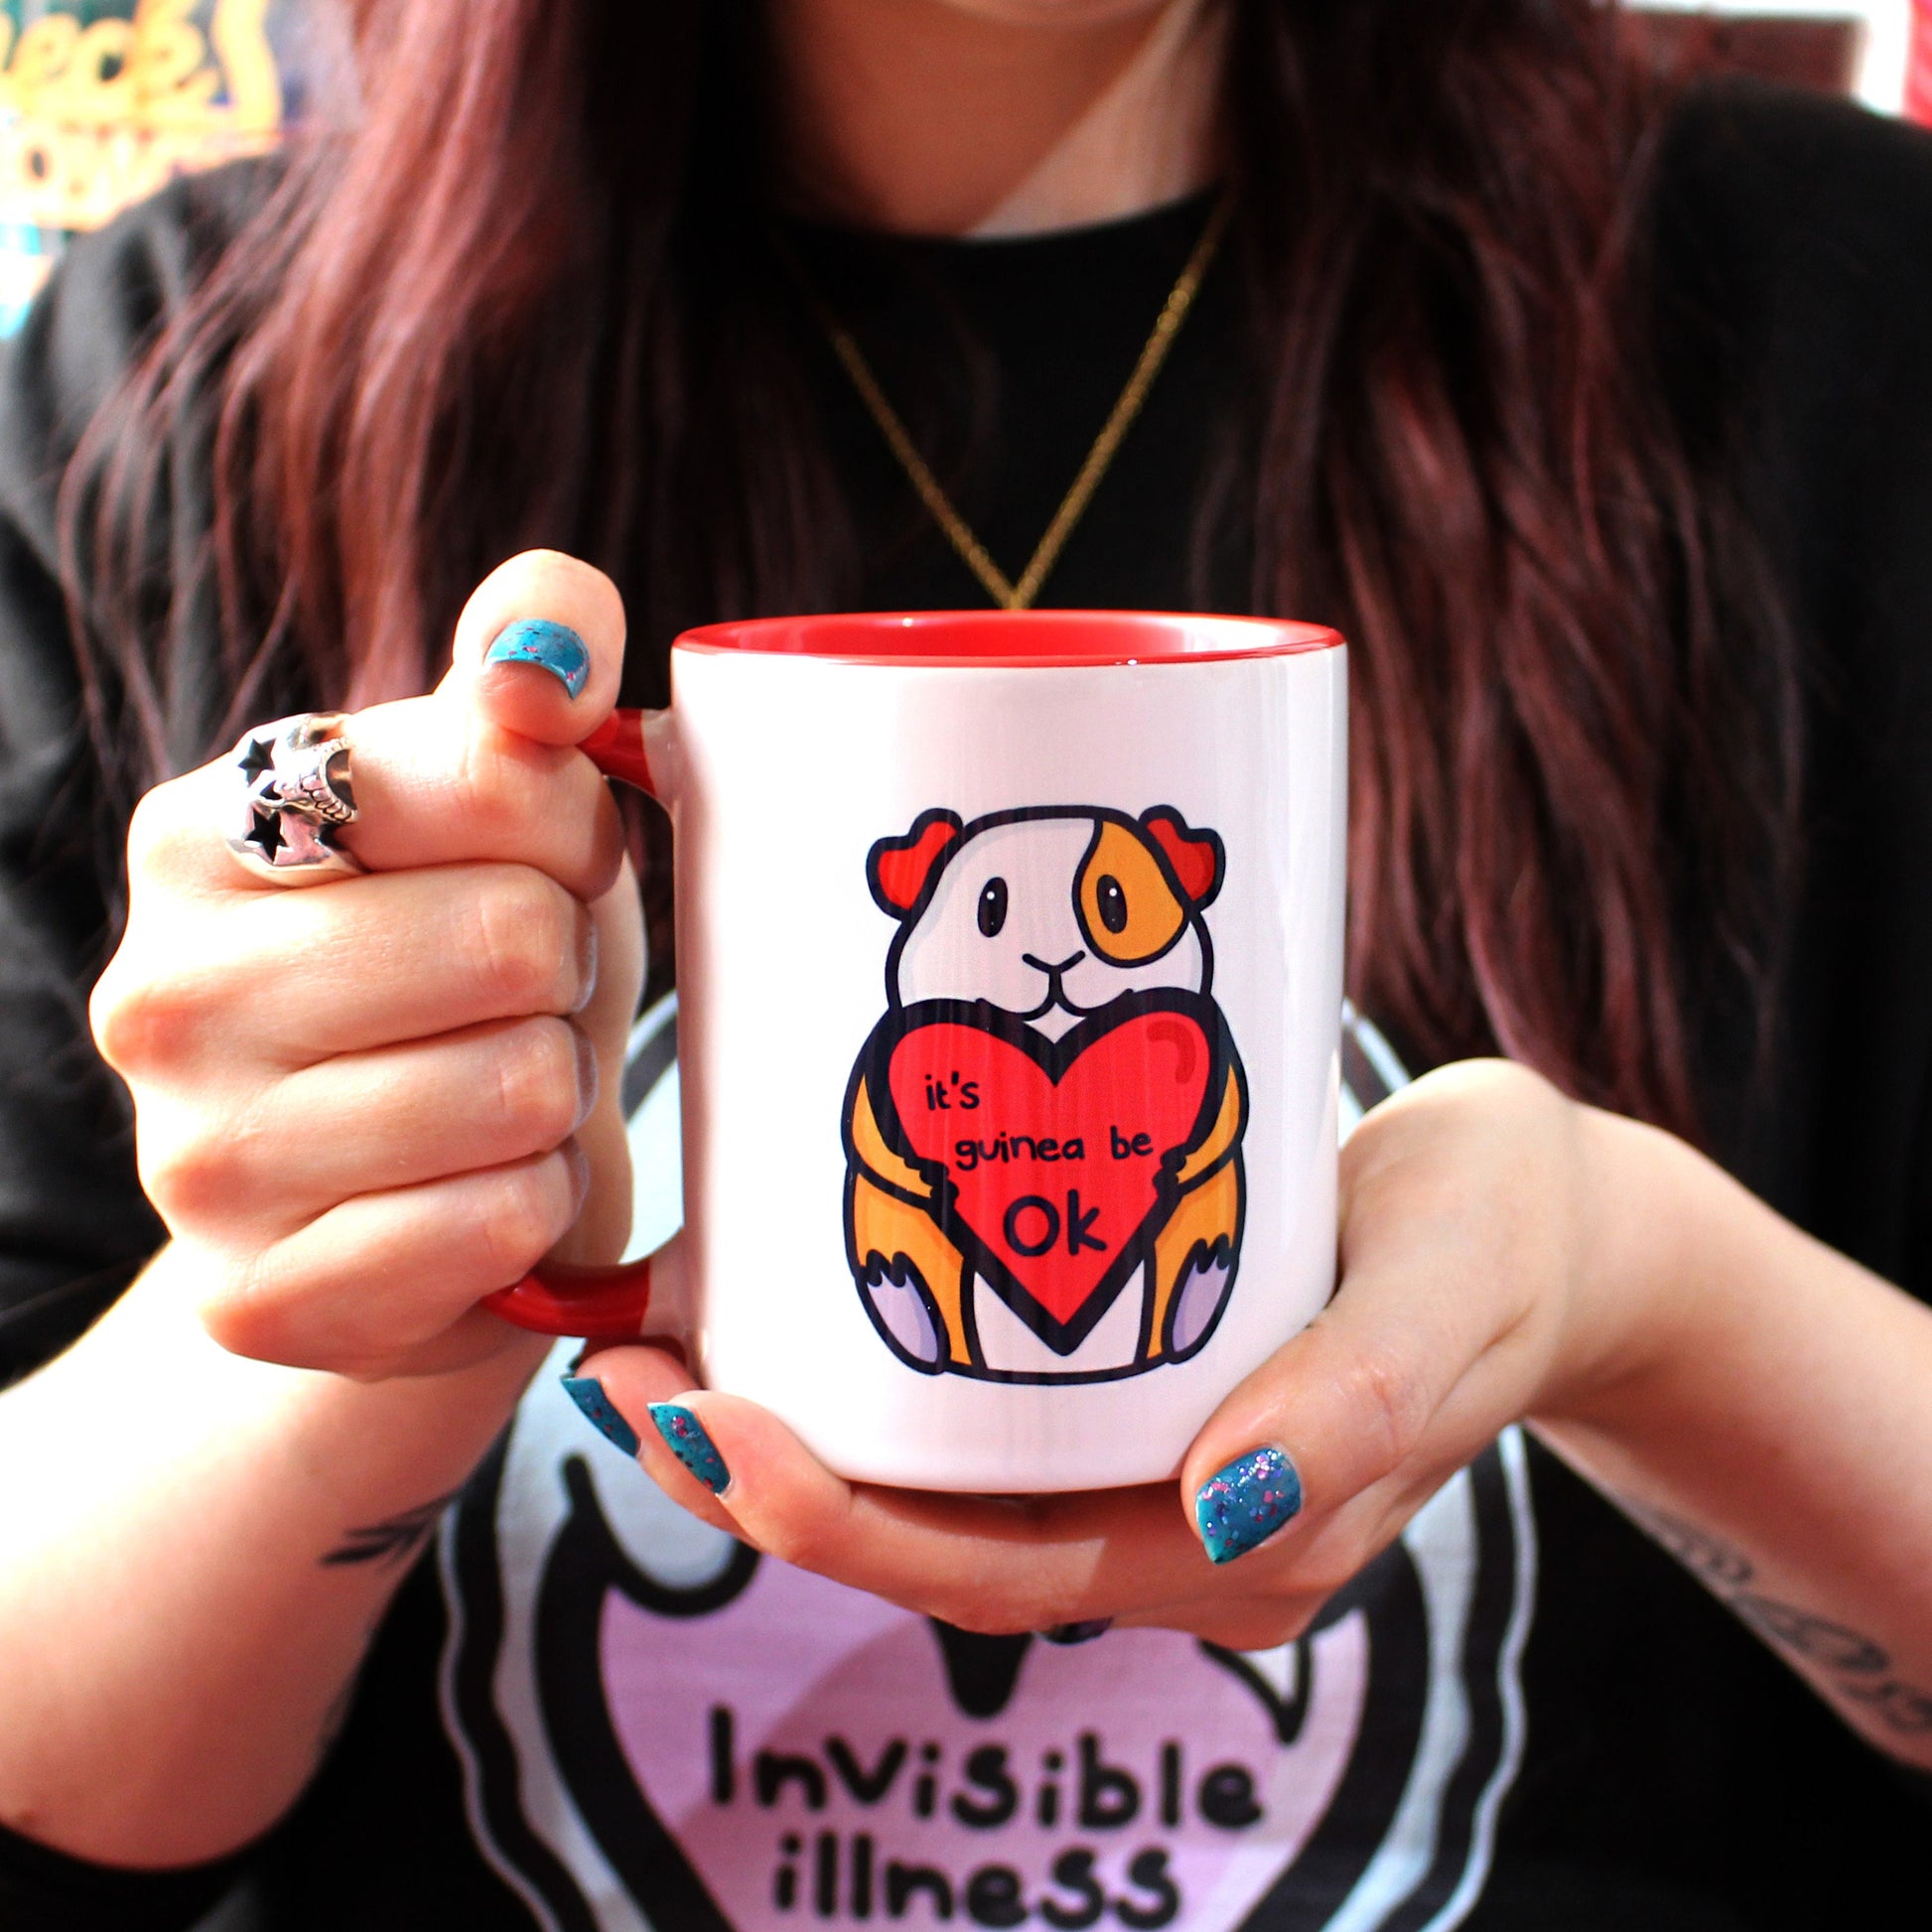 The It's Gonna Be OK Guinea Pig Mug being held up by Nikky, the owner of Innabox, who has brown long hair, blue nail varnish and large silver skull ring. The white mug has a red inside and handle with a front print of a orange and white guinea pig smiling holding a red heart with black text reading 'it's guinea be ok'. The hand drawn design is a reminder of staying positive.